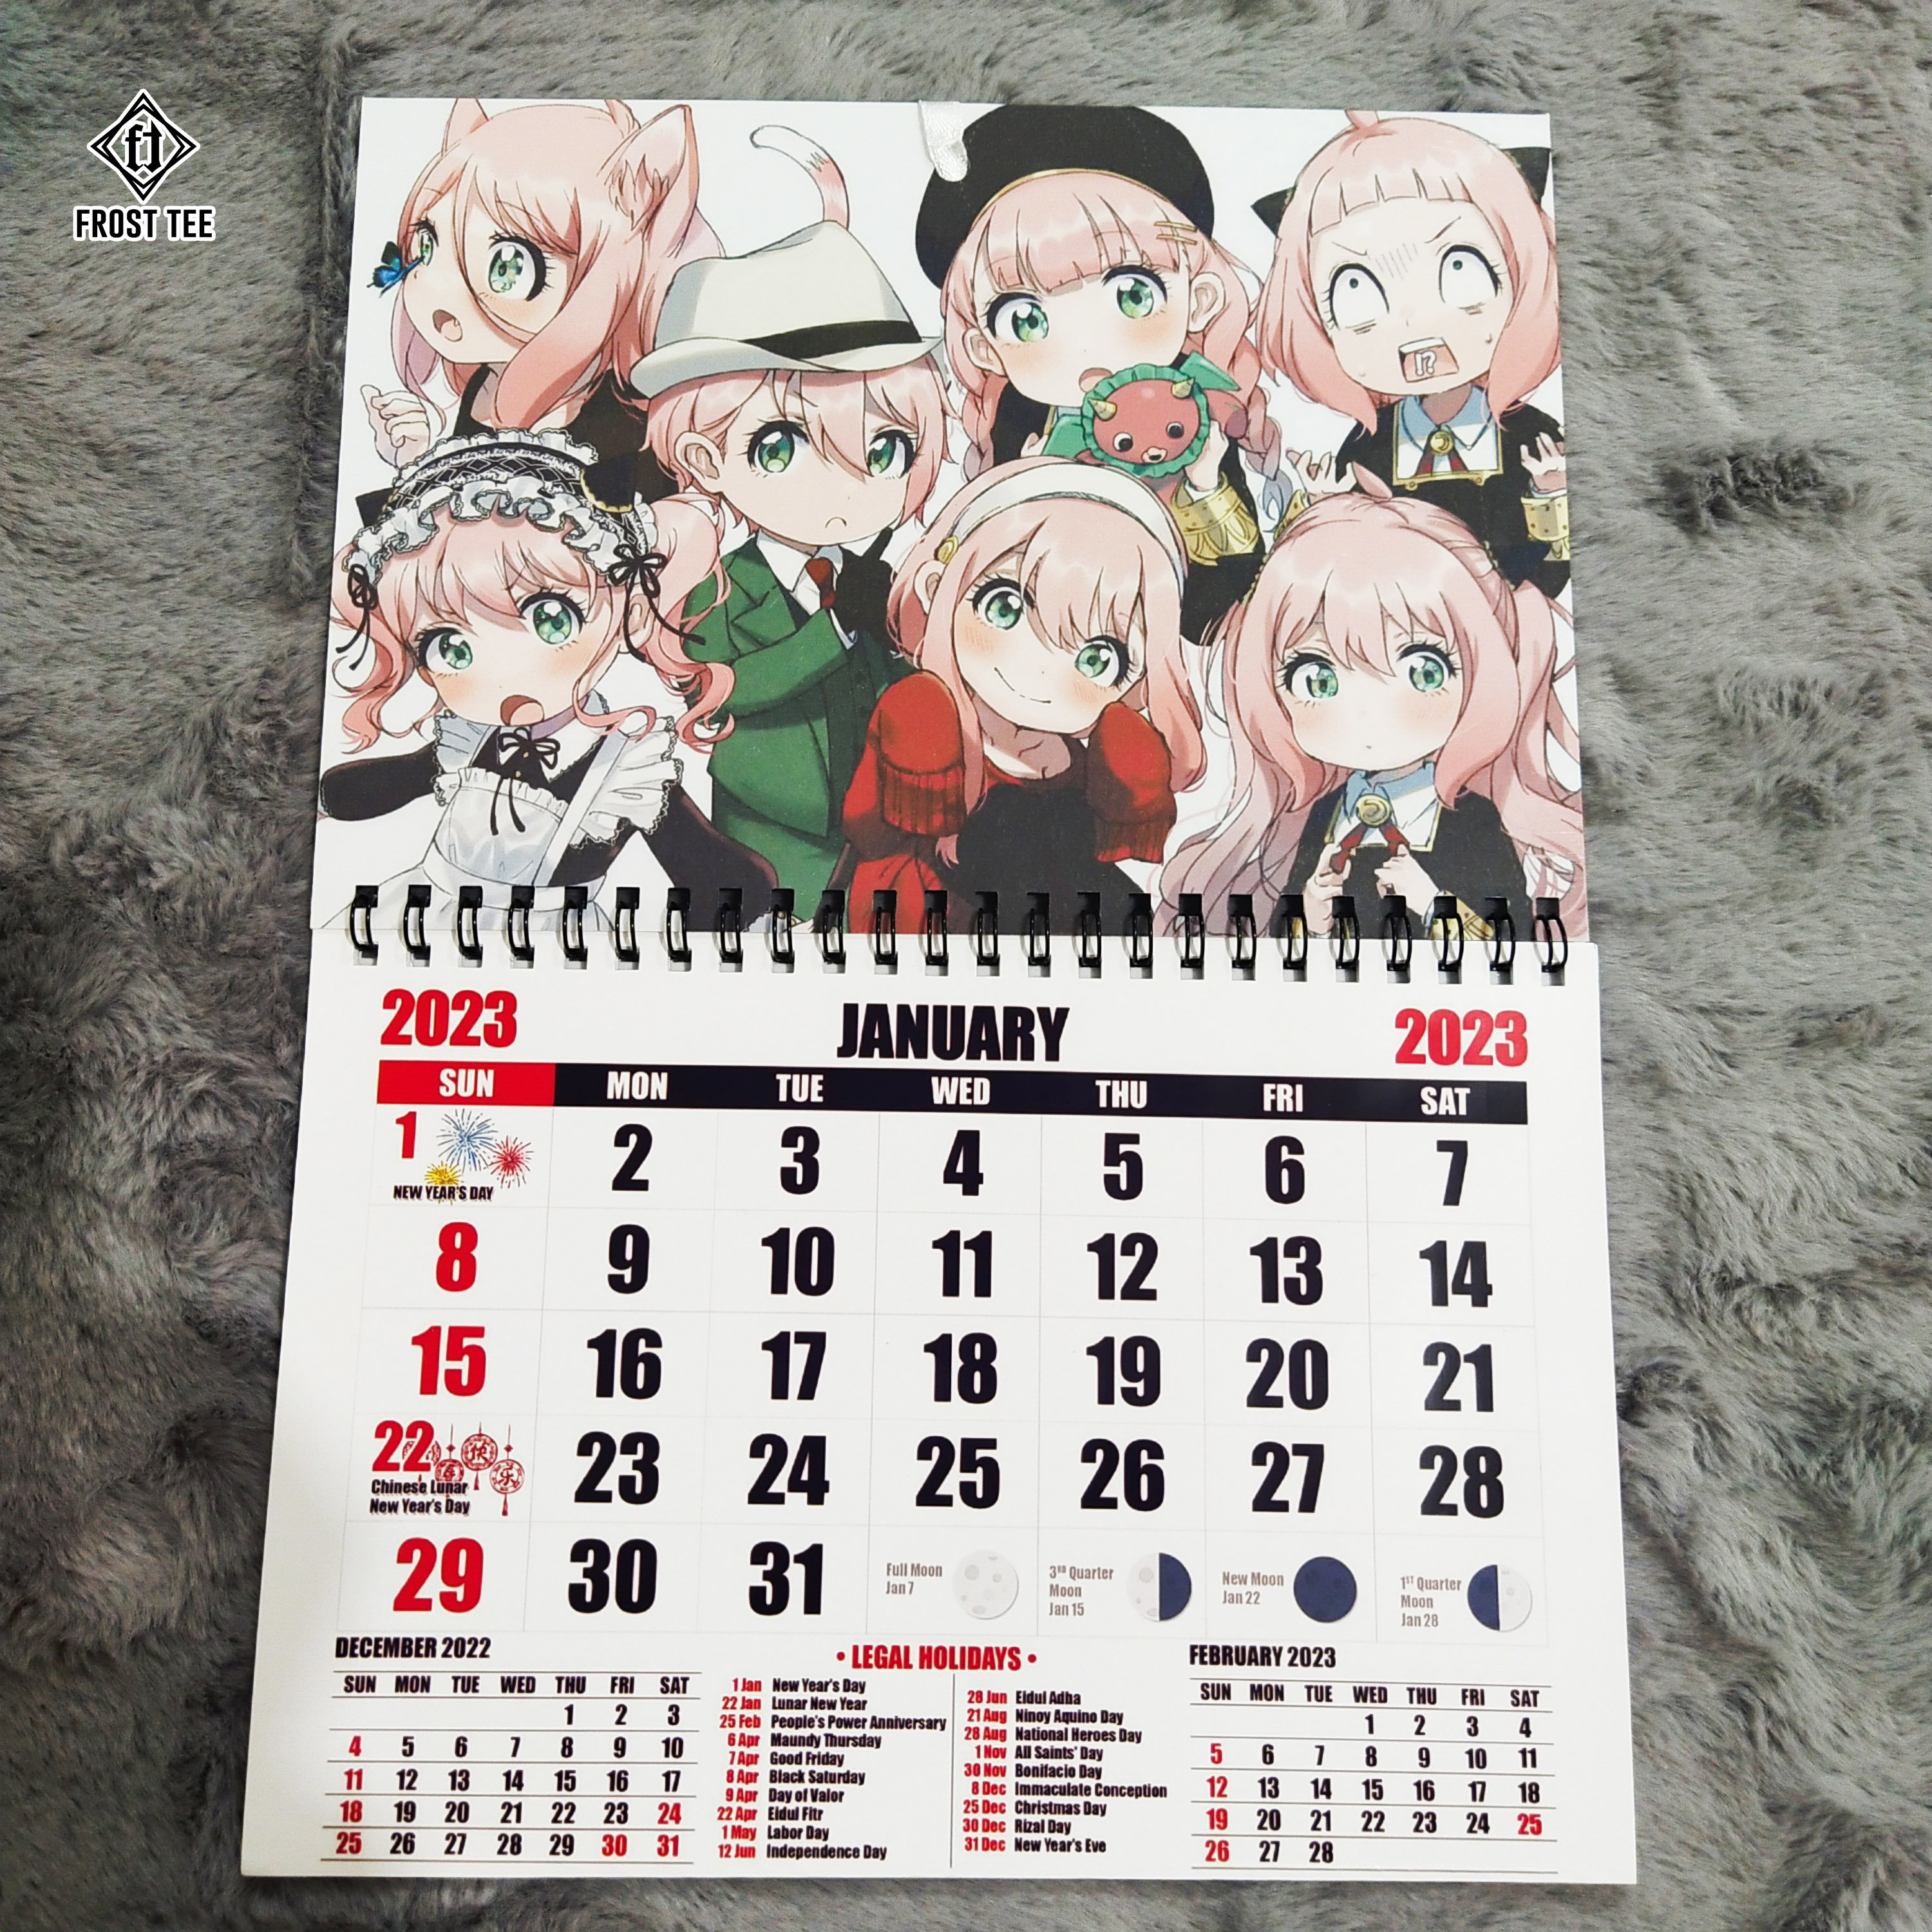 Anime Girl Calendar 2023: Calendar 2022-2023 Monthly Planner with Exclusive  illustration, Monthly Square Calendar 2023 + Bonus 8 Free Months Kalendar  Calendario Calendrier.3 : Anime, Girl: Amazon.sg: Books